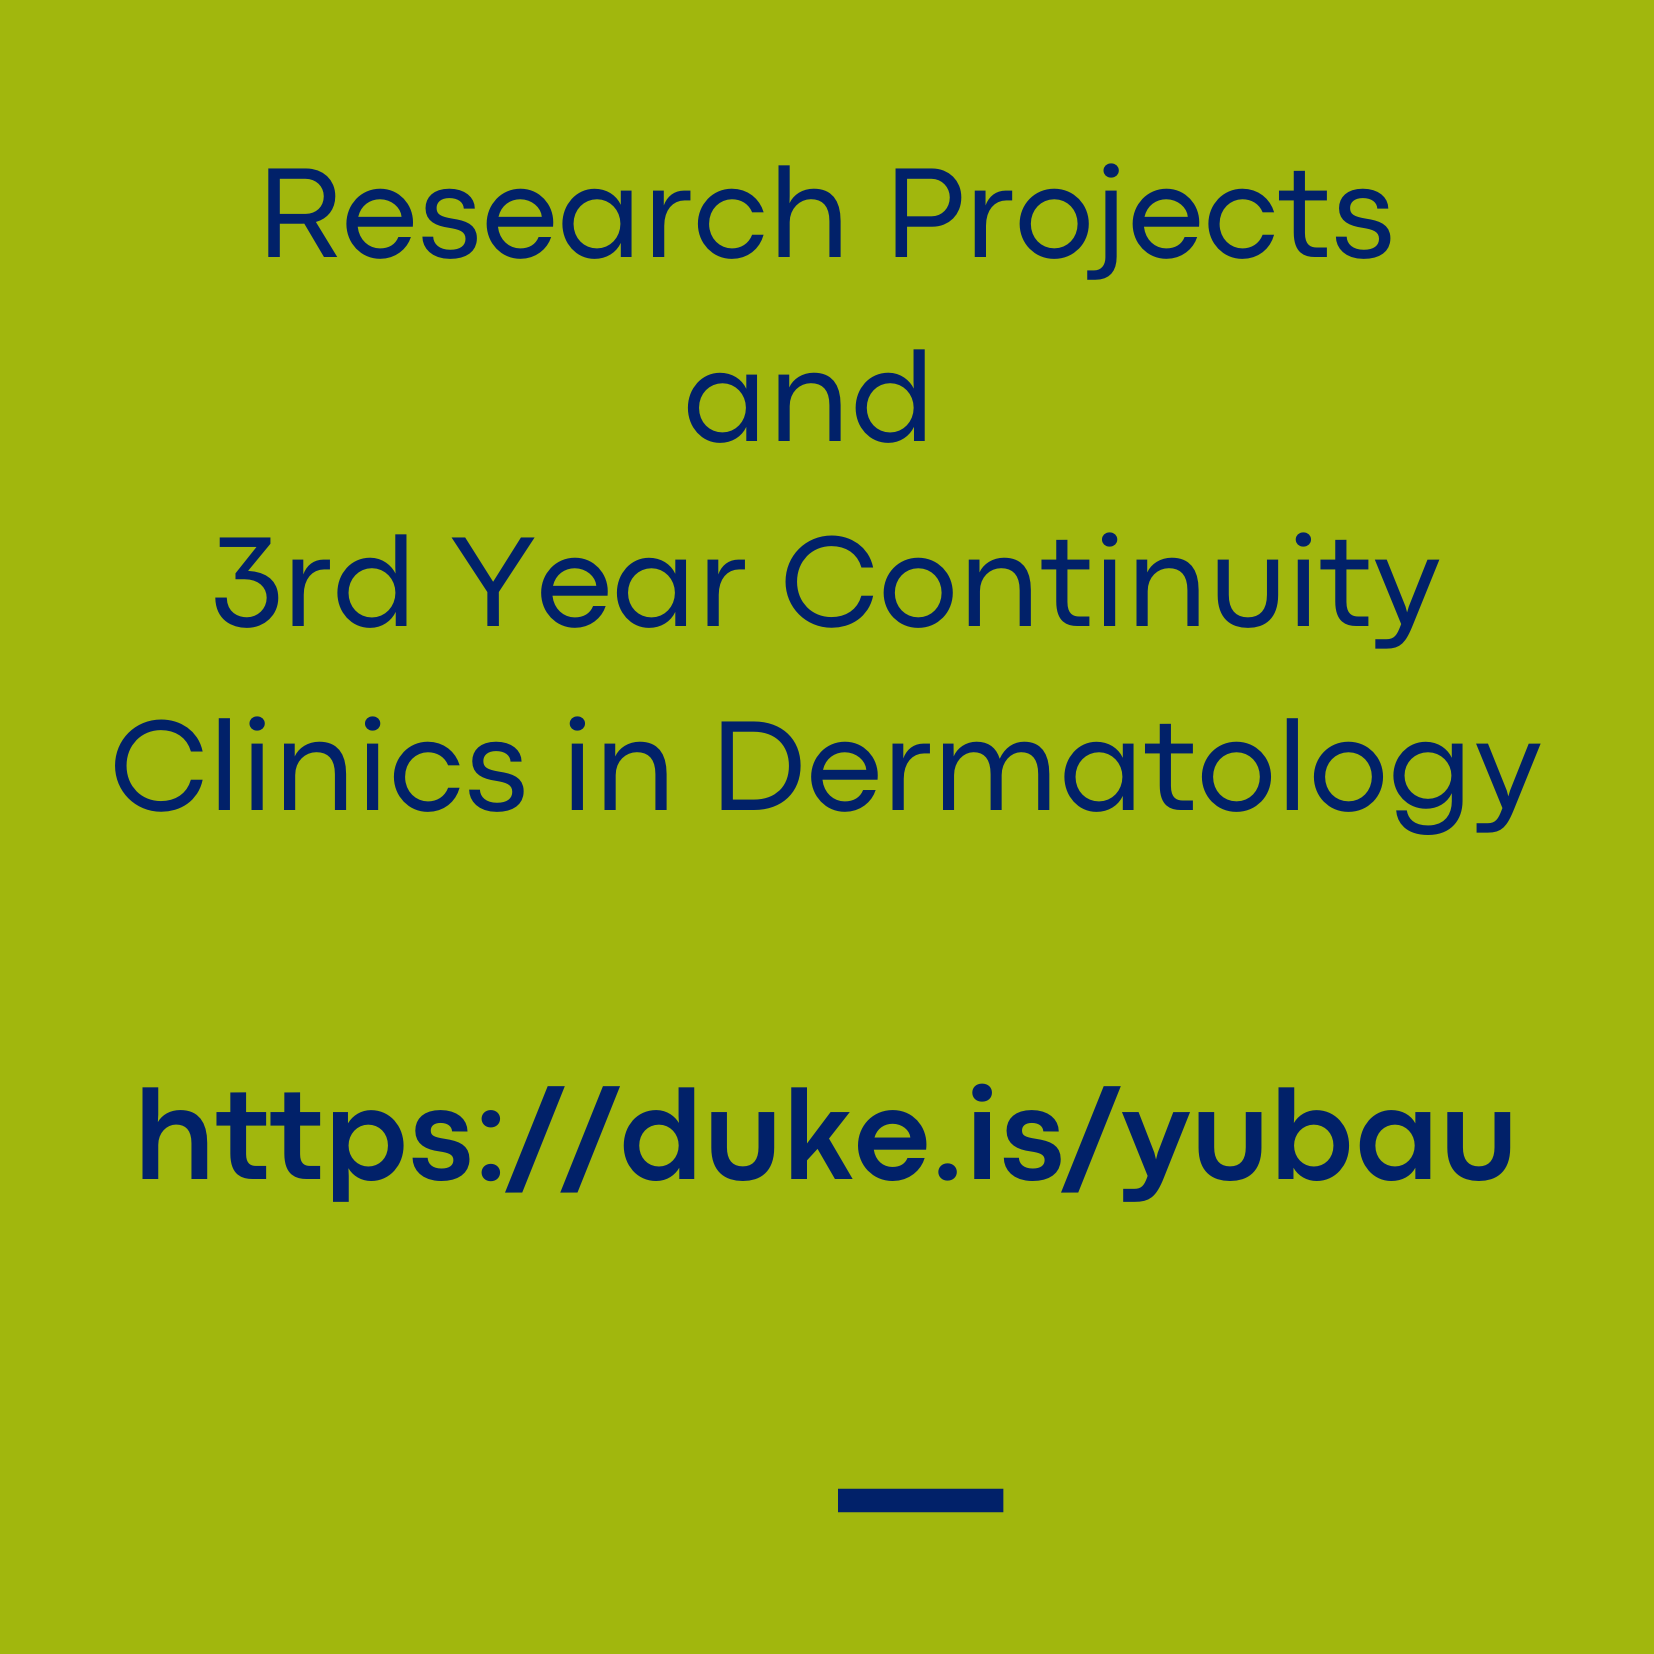 Research and Continuity Clinic Opportunities